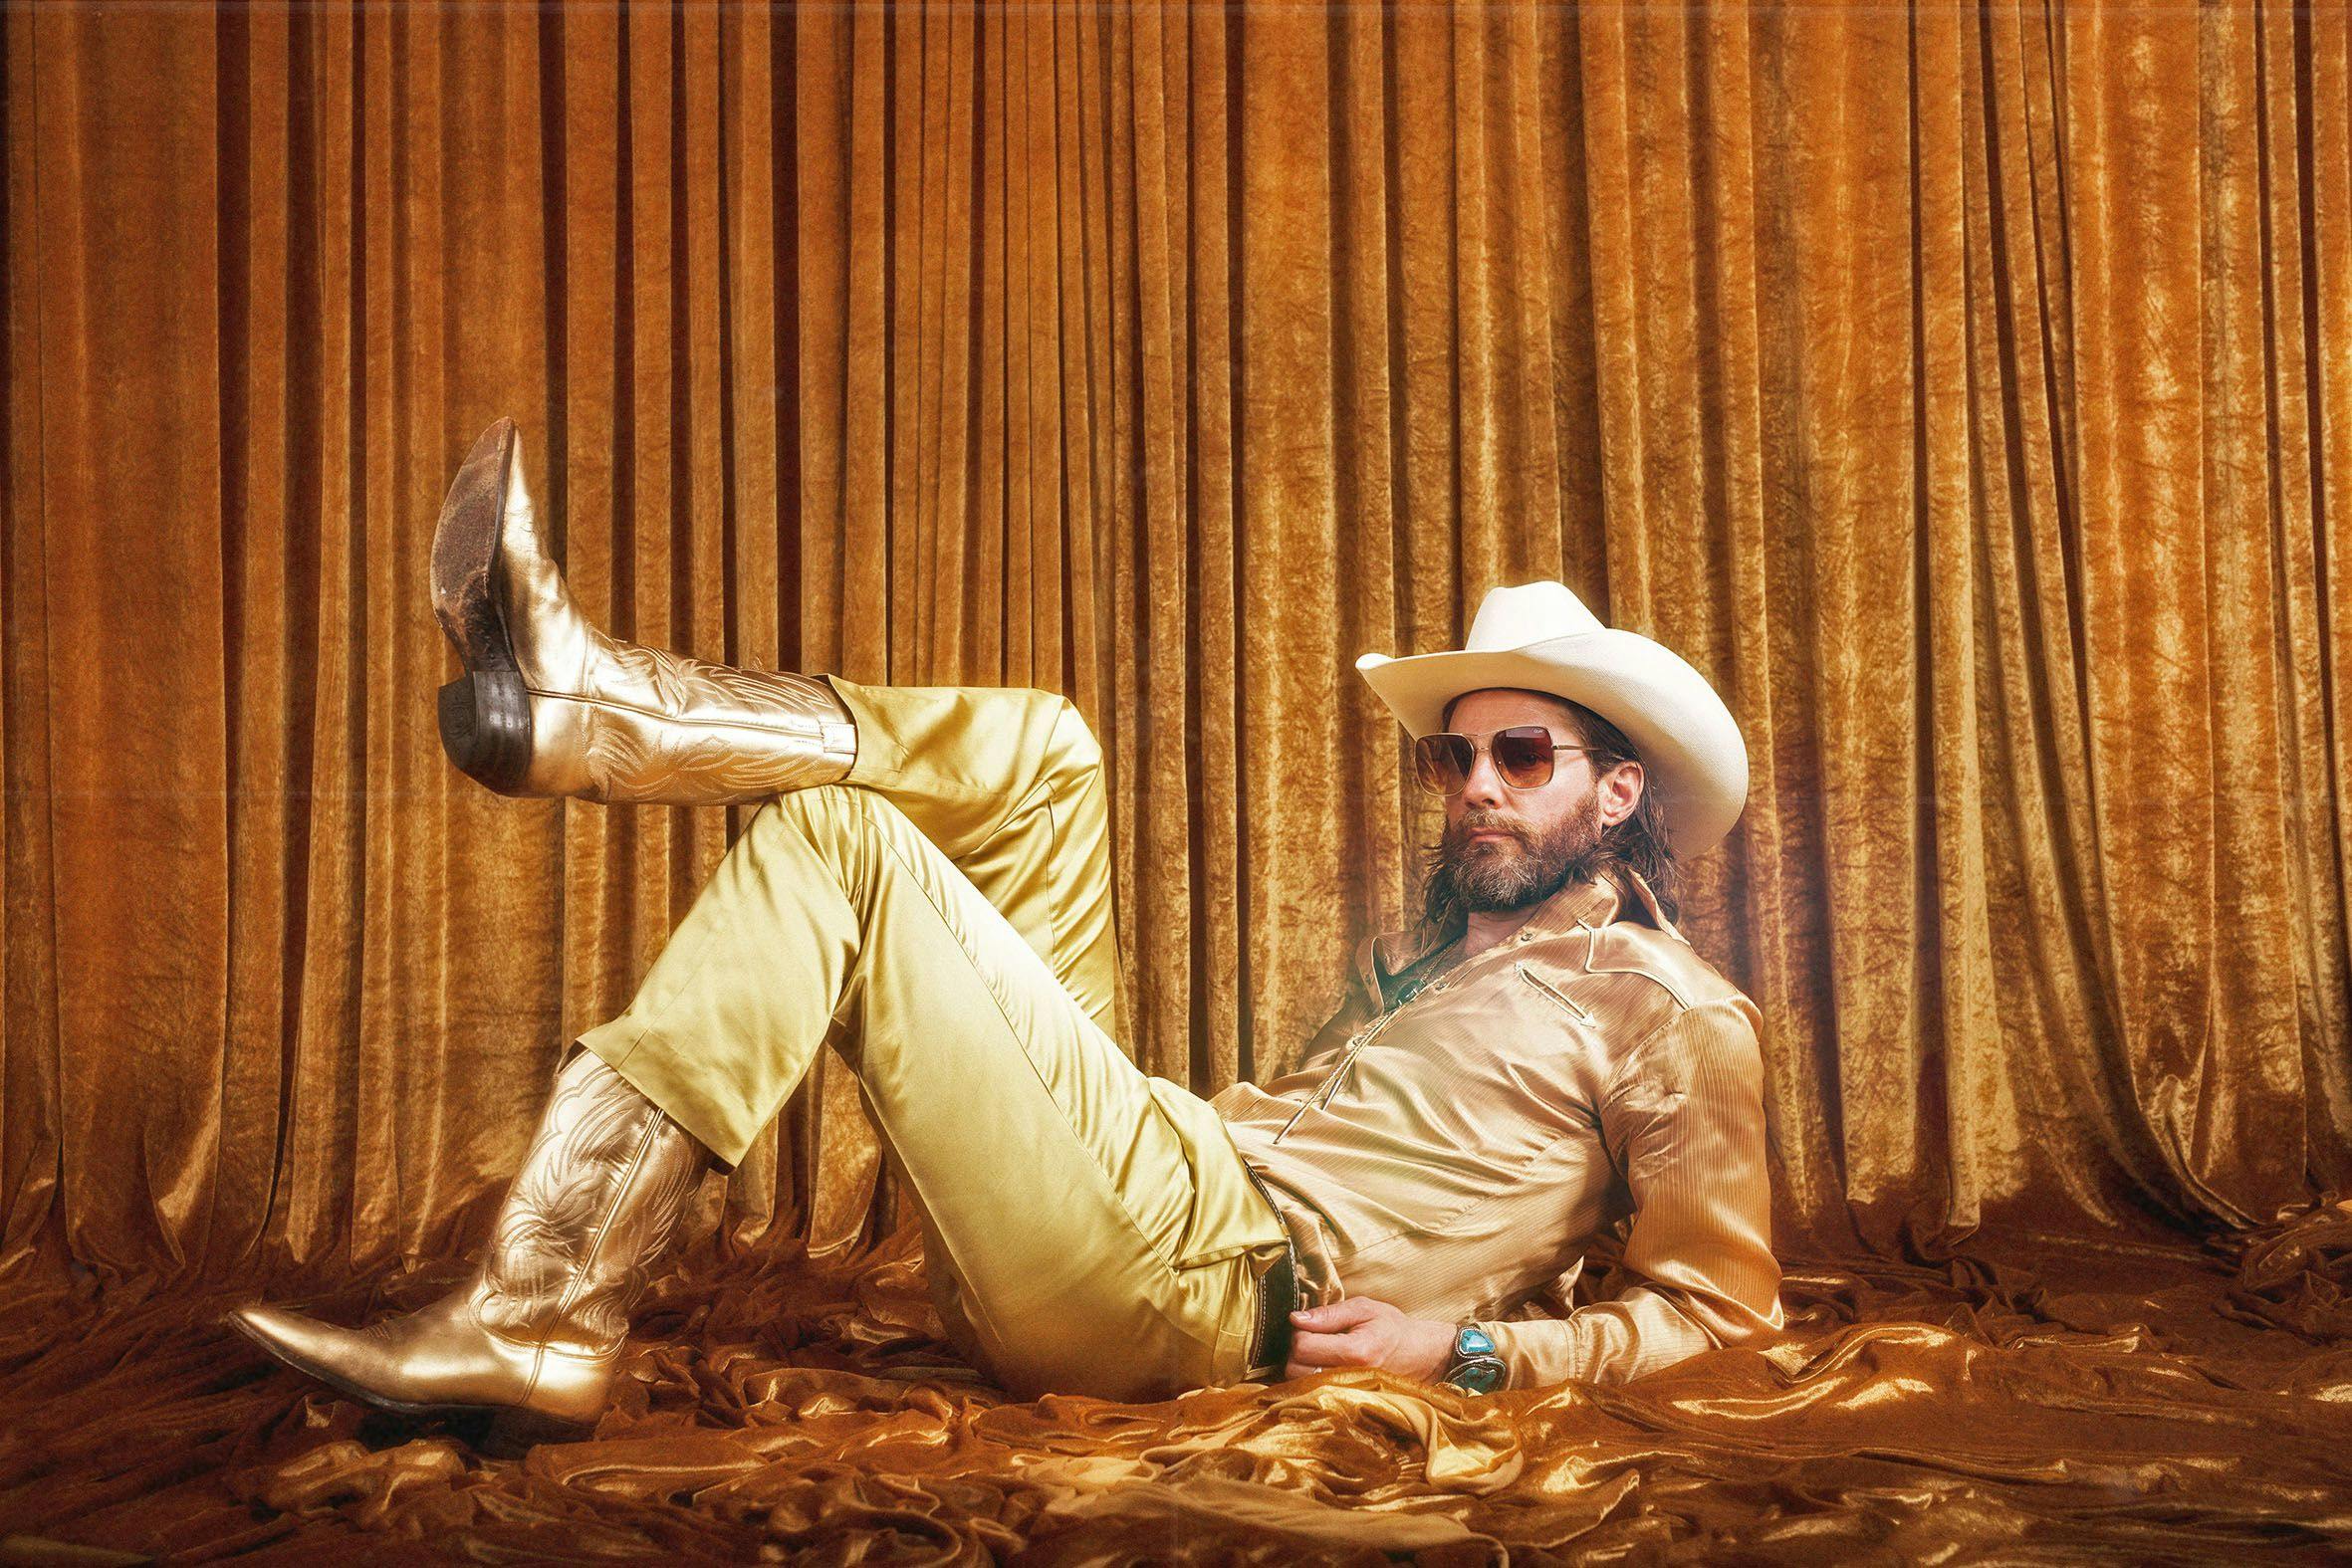  A man in a gold suit and cowboy boots on the floor.